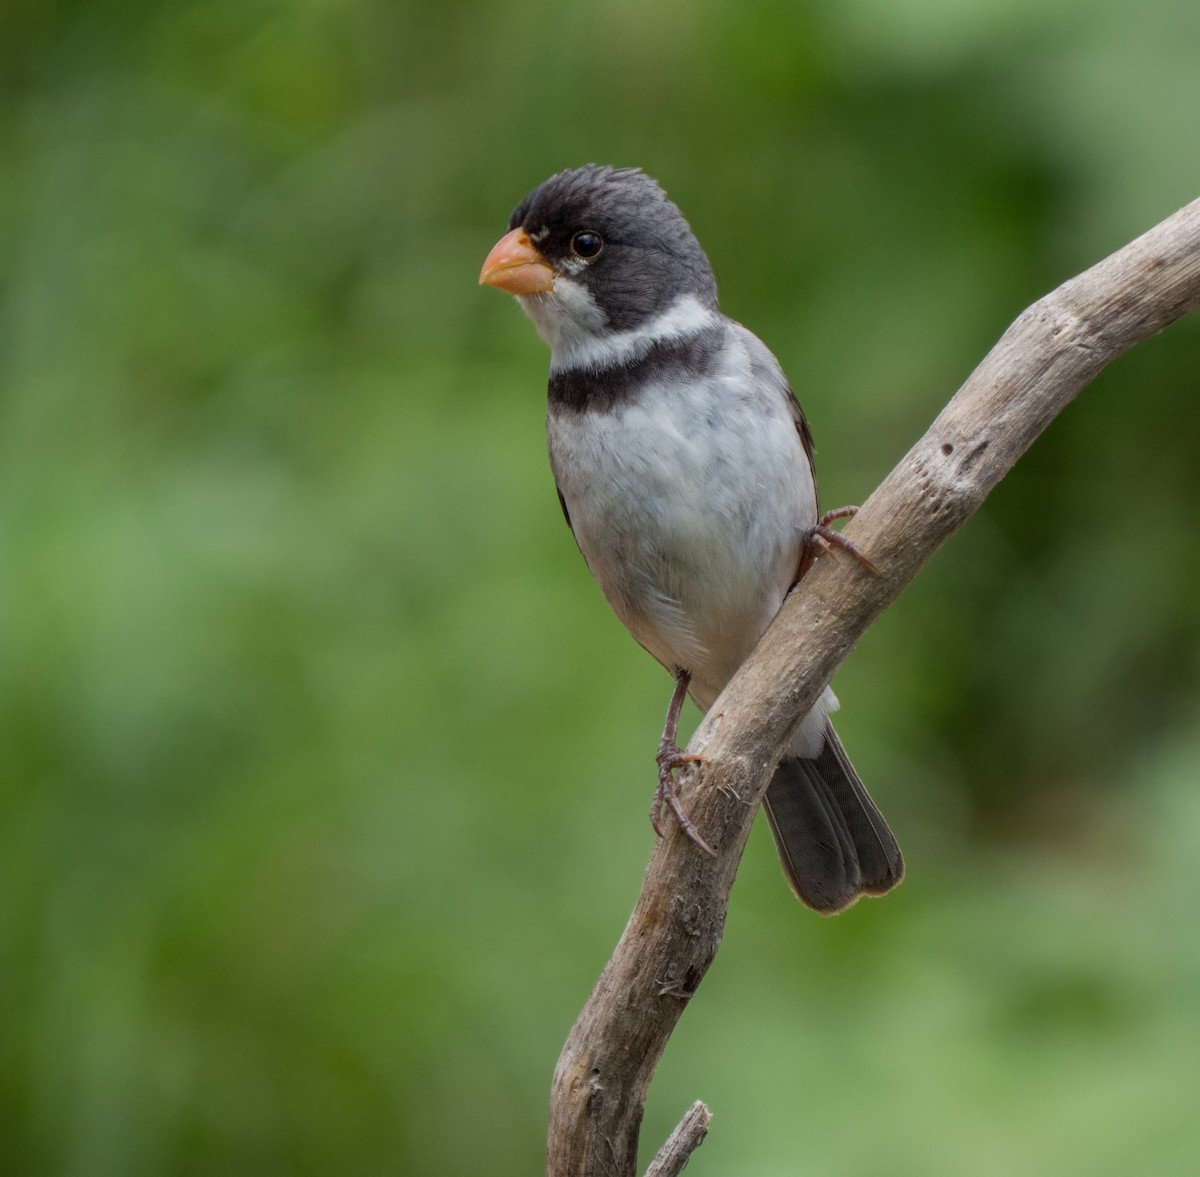 White-throated Seedeater - Breno Farias